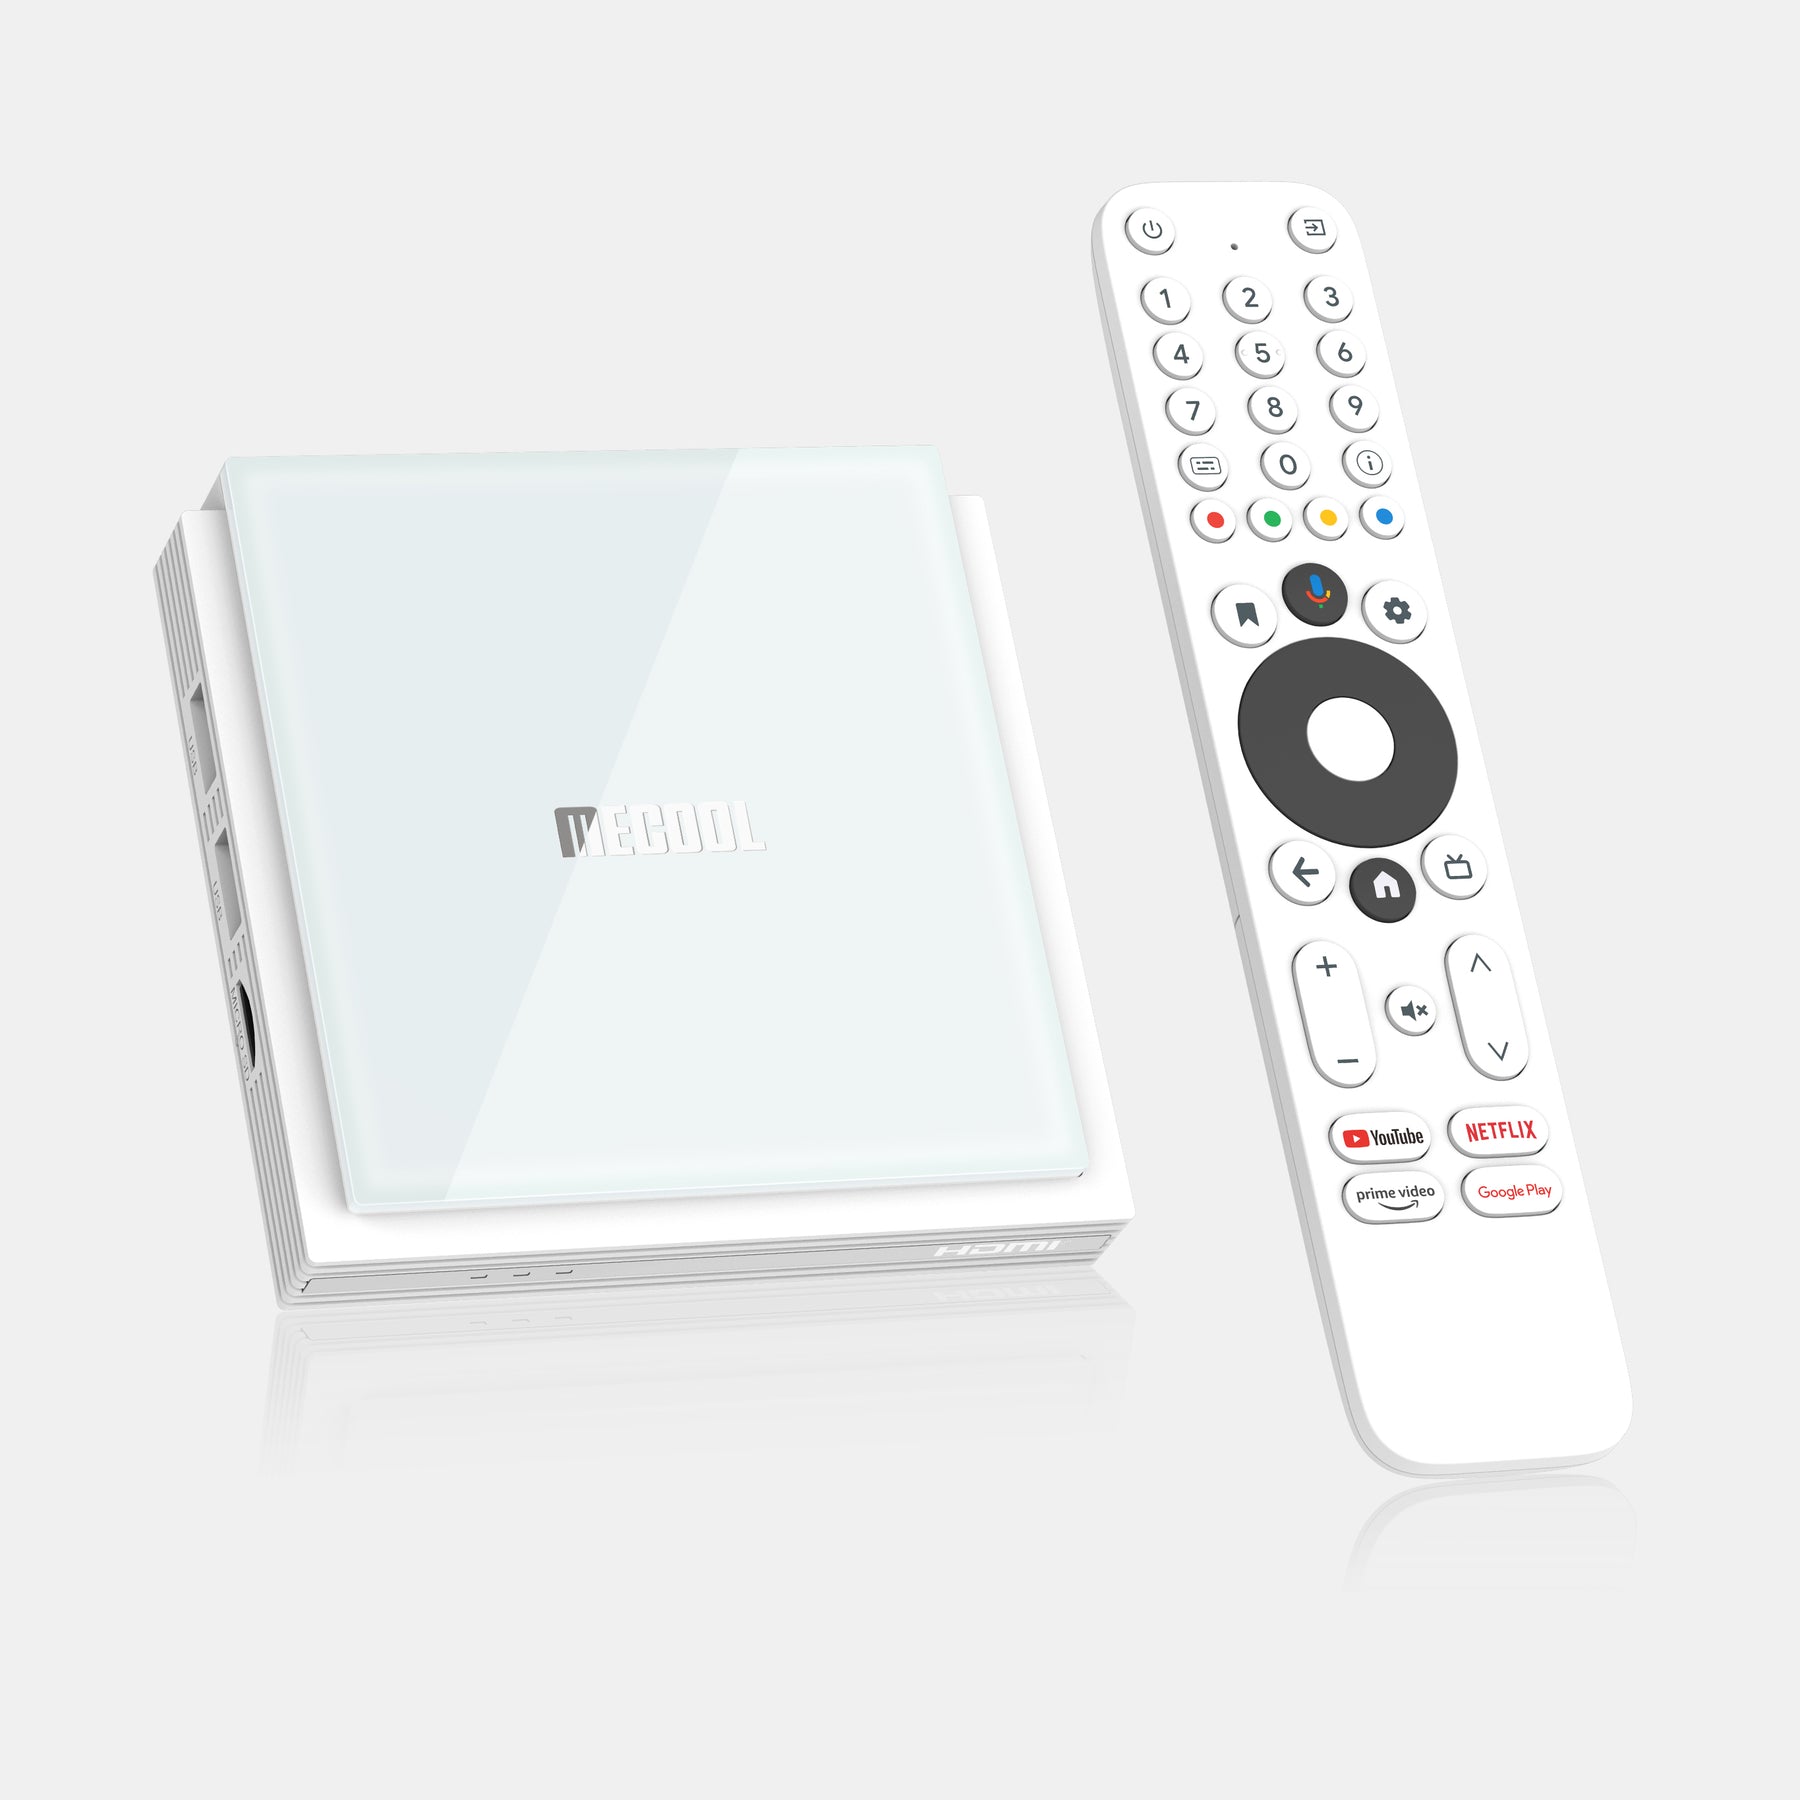 Mecool KM2 Plus Deluxe - Android TV Guide